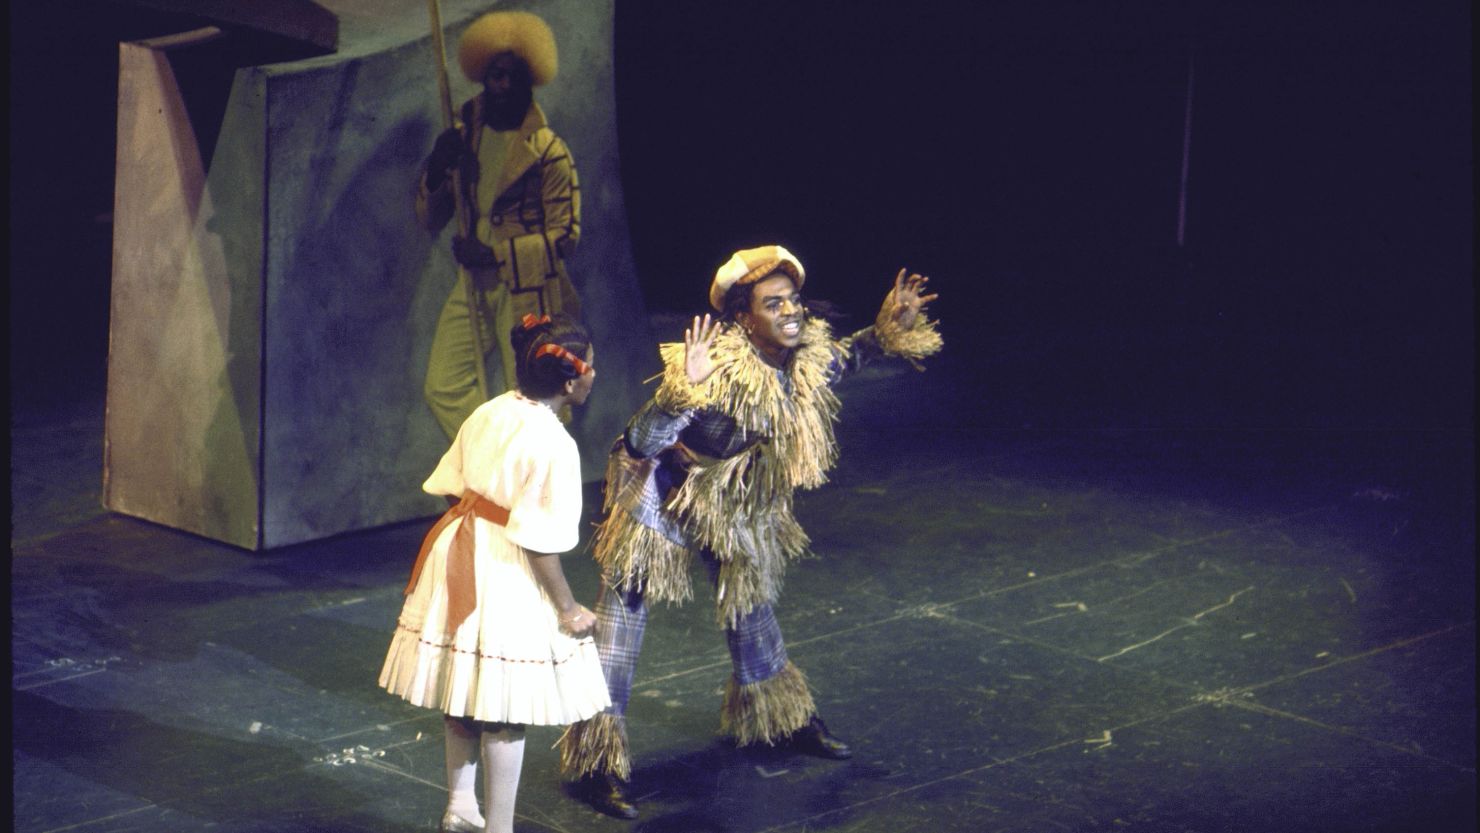 Mills sings with Hinton Battle as the Scarecrow.